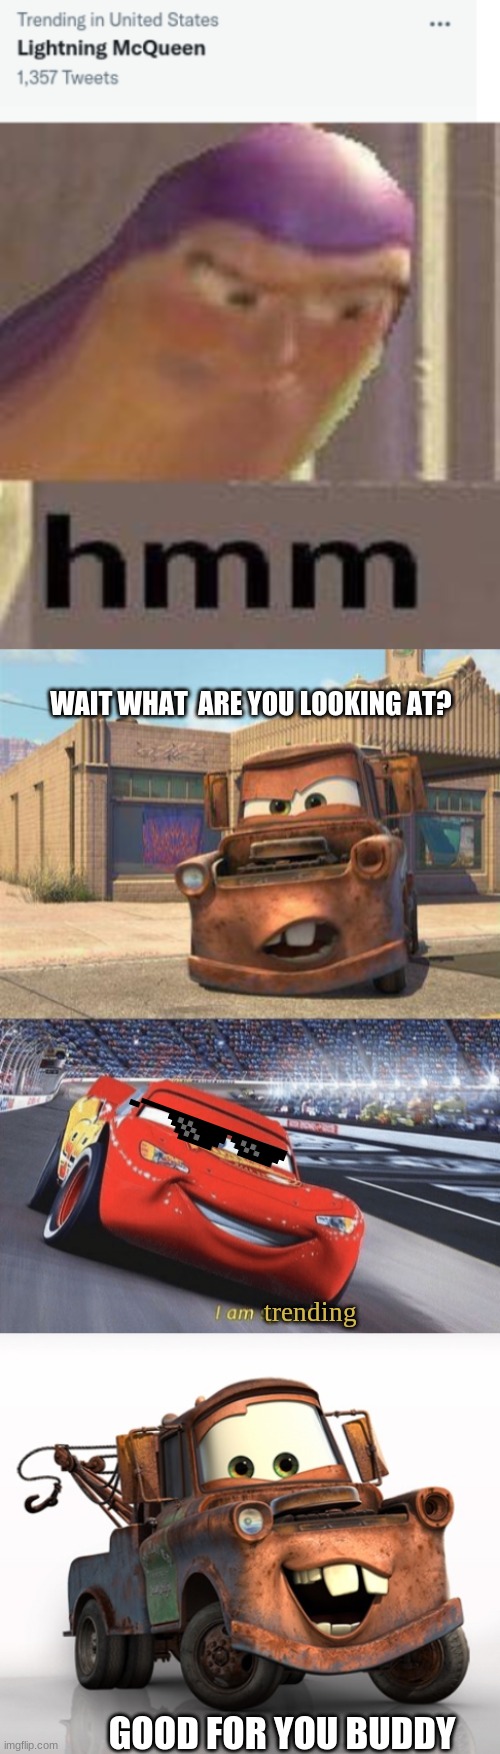 Space man toy is confused about what is "trending" | WAIT WHAT  ARE YOU LOOKING AT? trending; GOOD FOR YOU BUDDY | image tagged in buzz lightyear,mater,pixar,cars | made w/ Imgflip meme maker